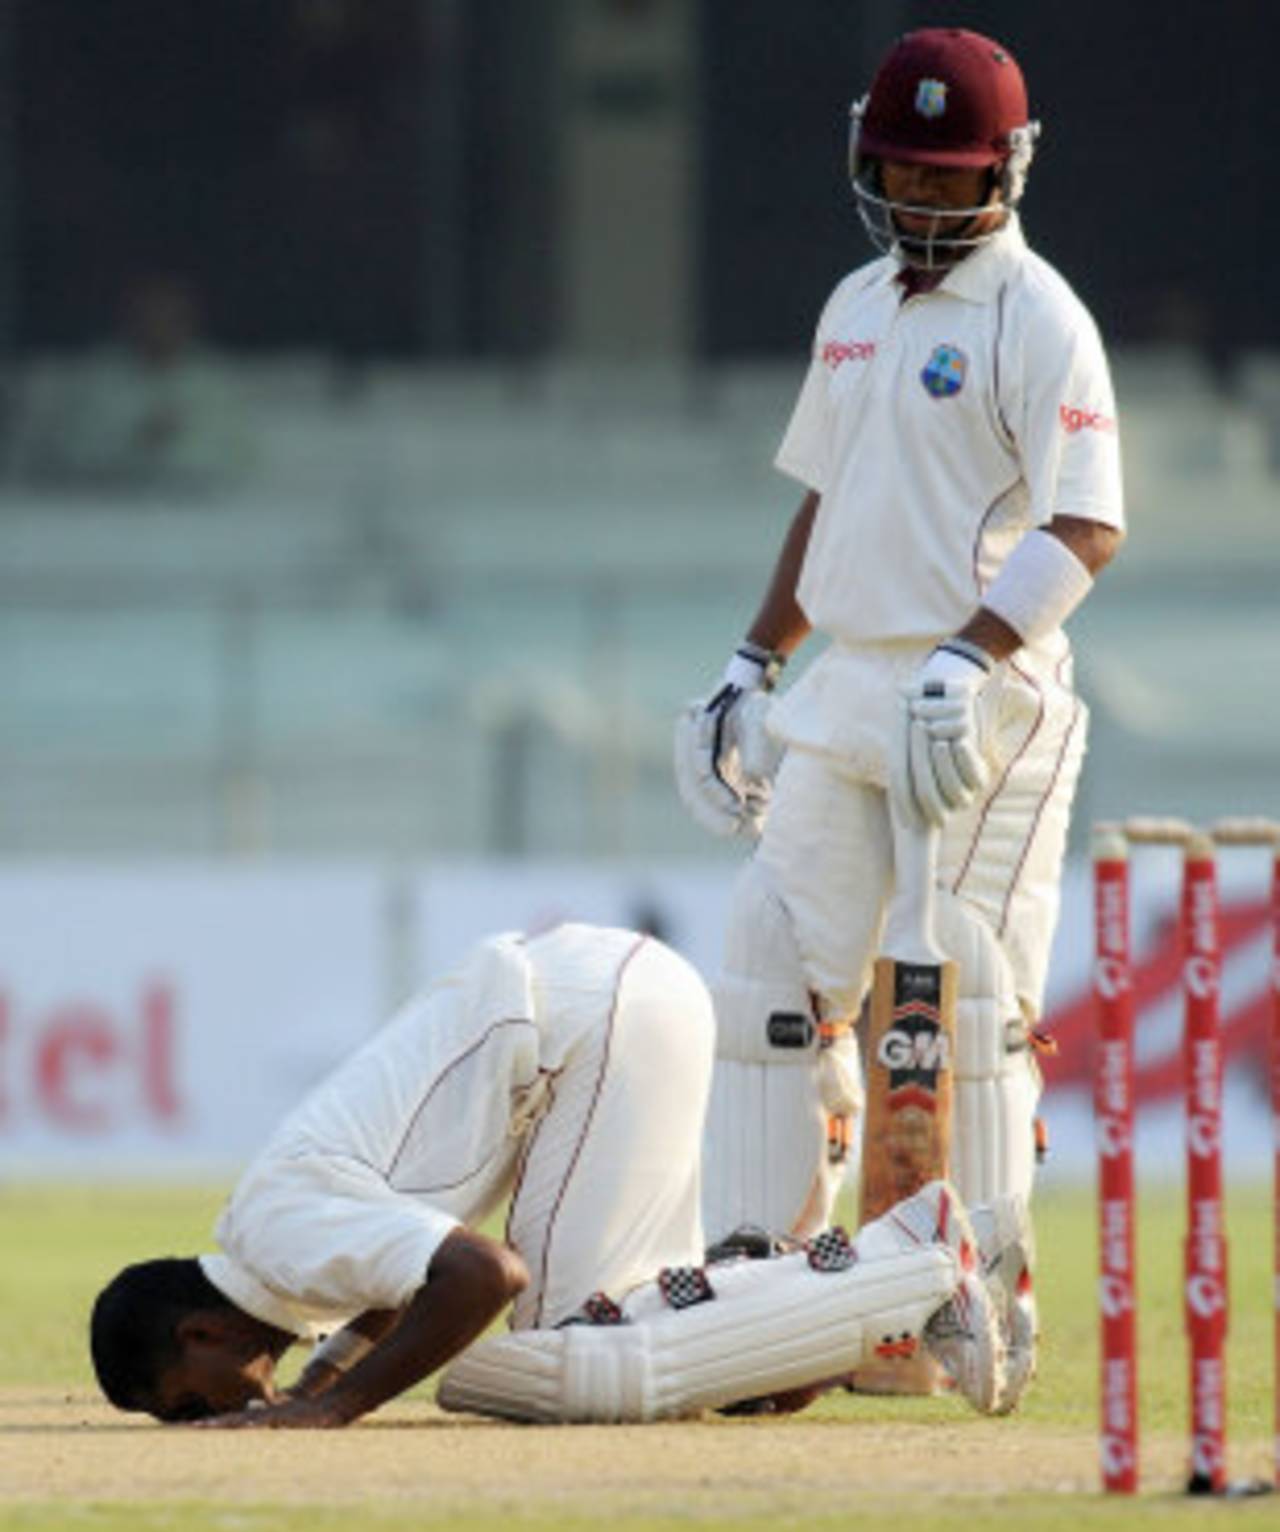 Shivnarine Chanderpaul kisses the ground after reaching his century, India v West Indies, 1st Test, New Delhi, 1st day